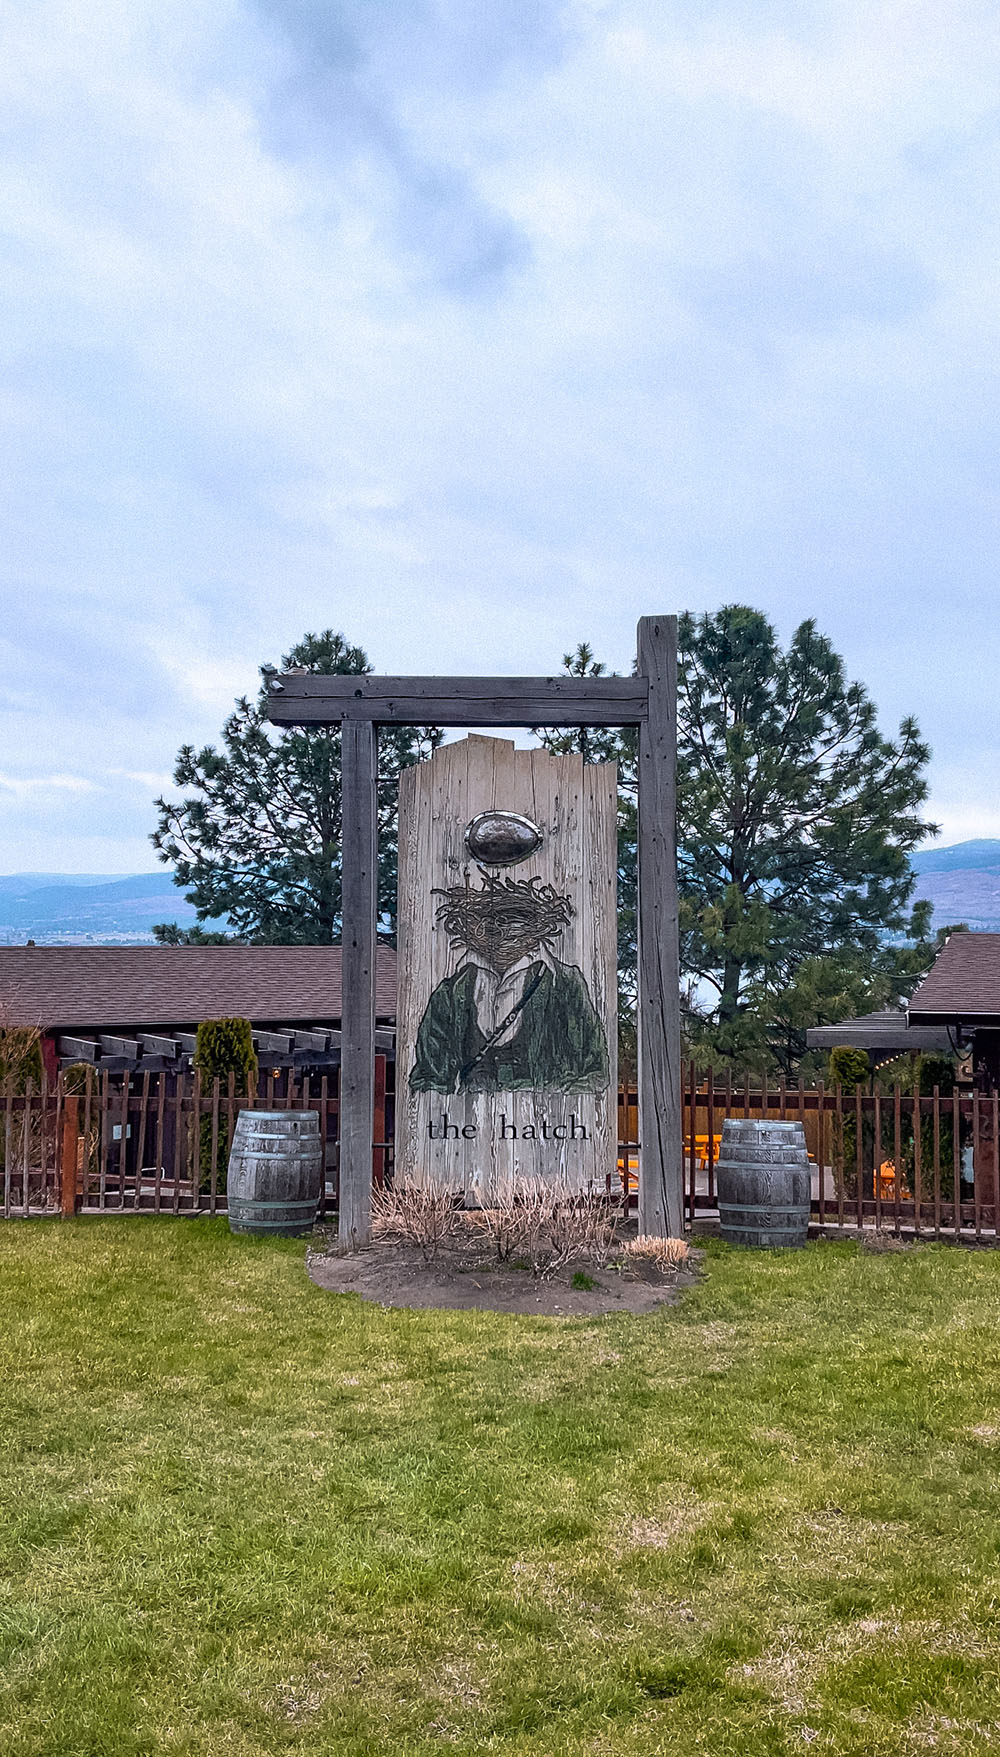 If you're heading to the Okanagan soon and planning on spending time in Kelowna, you don't want to miss this guide to the best wineries in Kelowna! From organic wineries to wineries with the best view, this guide will help you plan your visit to Kelowna’s incredible wine region. Pictured here: The Hatch